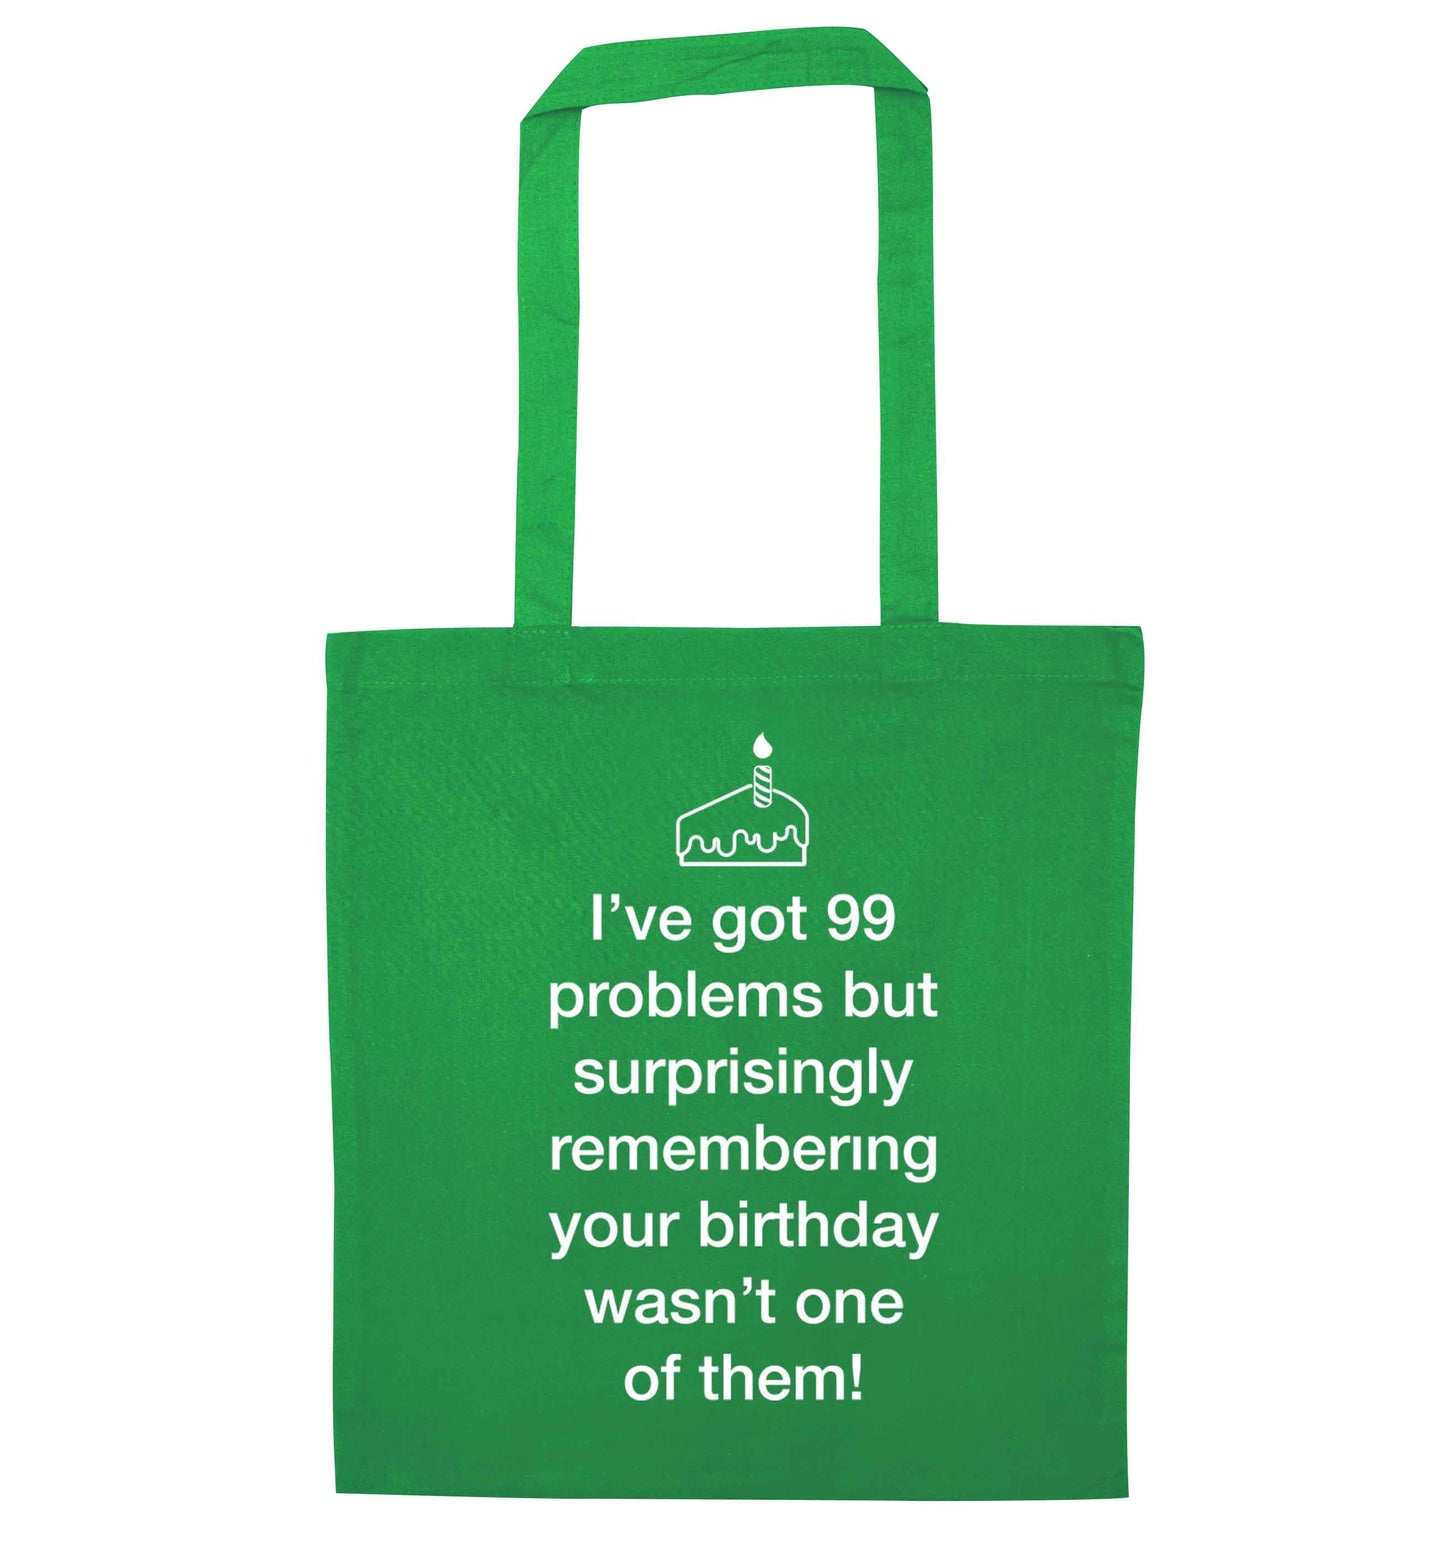 I've got 99 problems but surprisingly remembering your birthday wasn't one of them! green tote bag